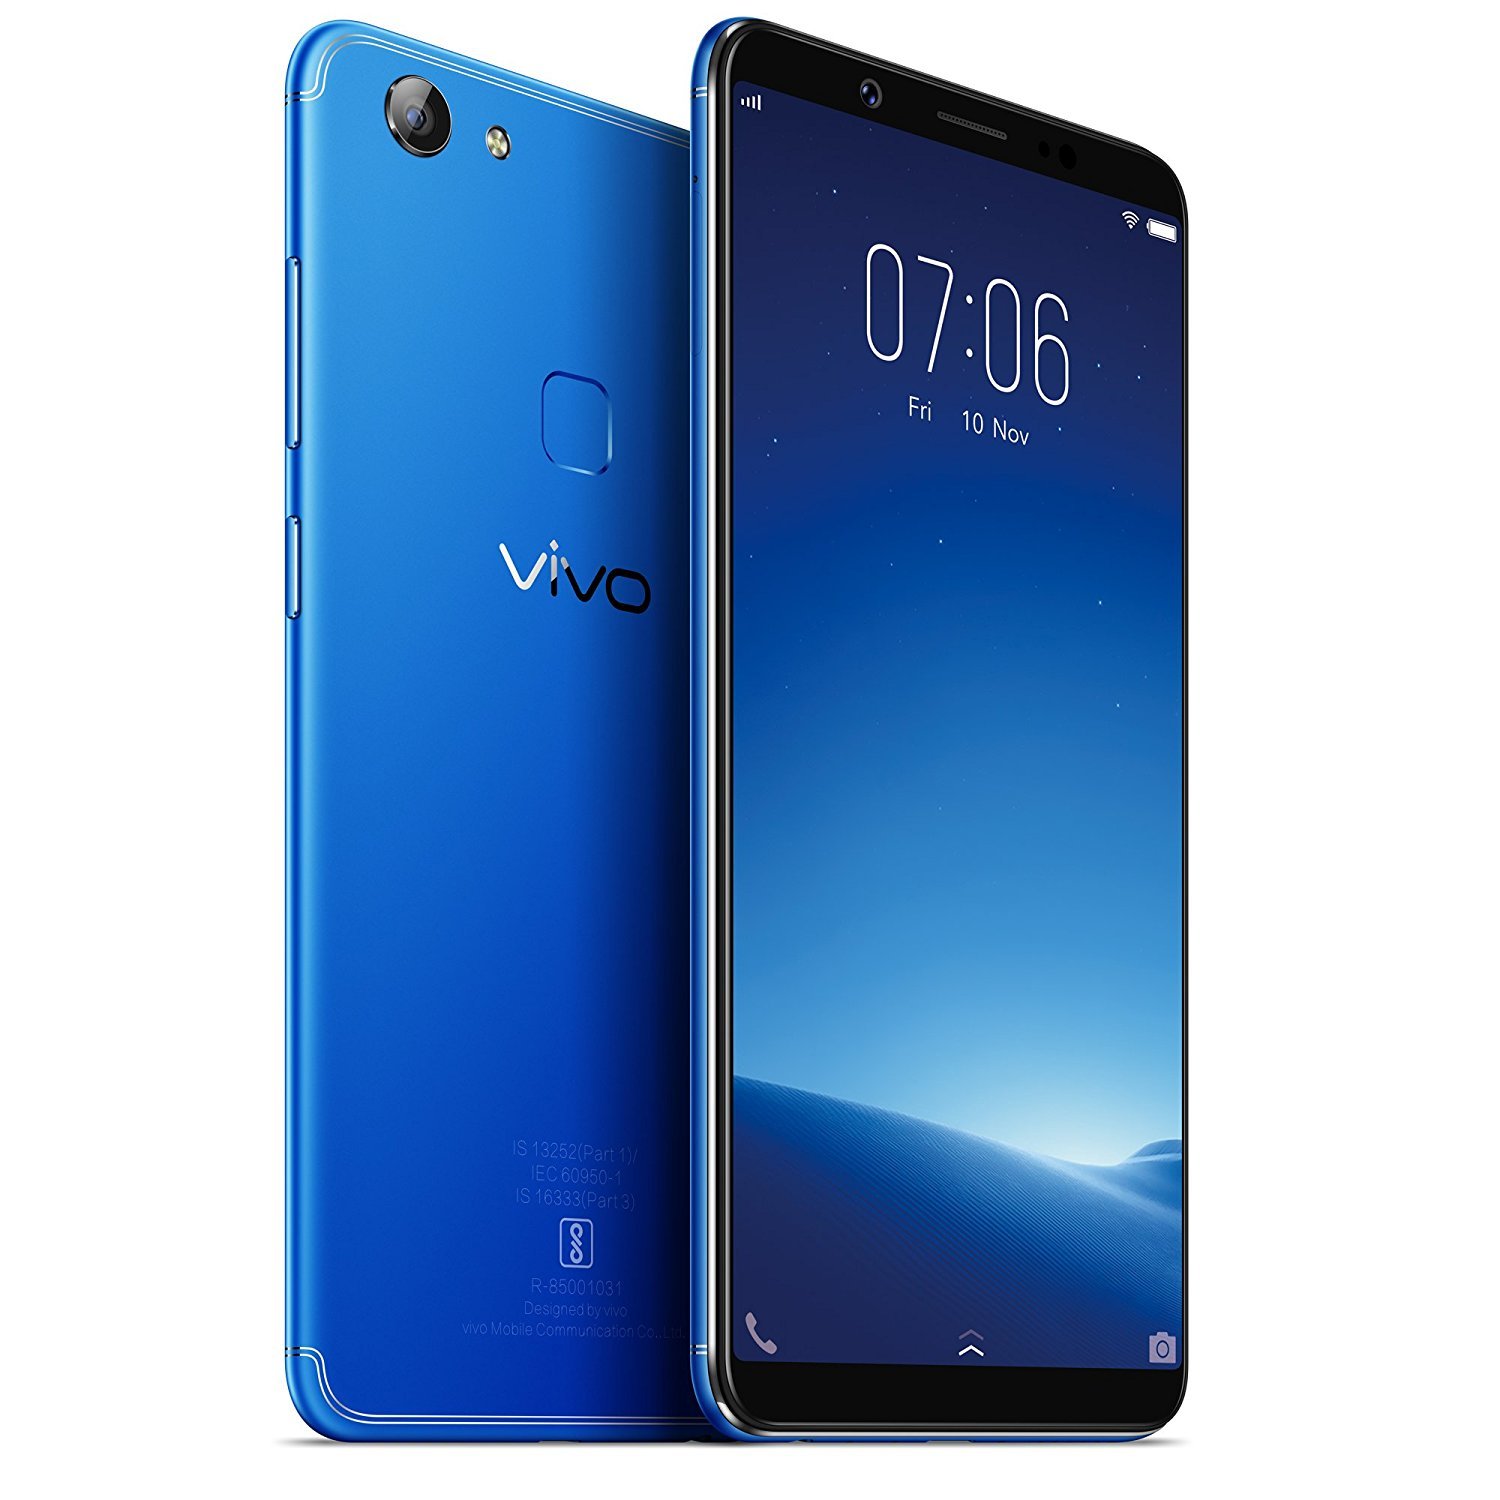 Vivo Planning To Launch Two New 18 9 Models In India Discontinue